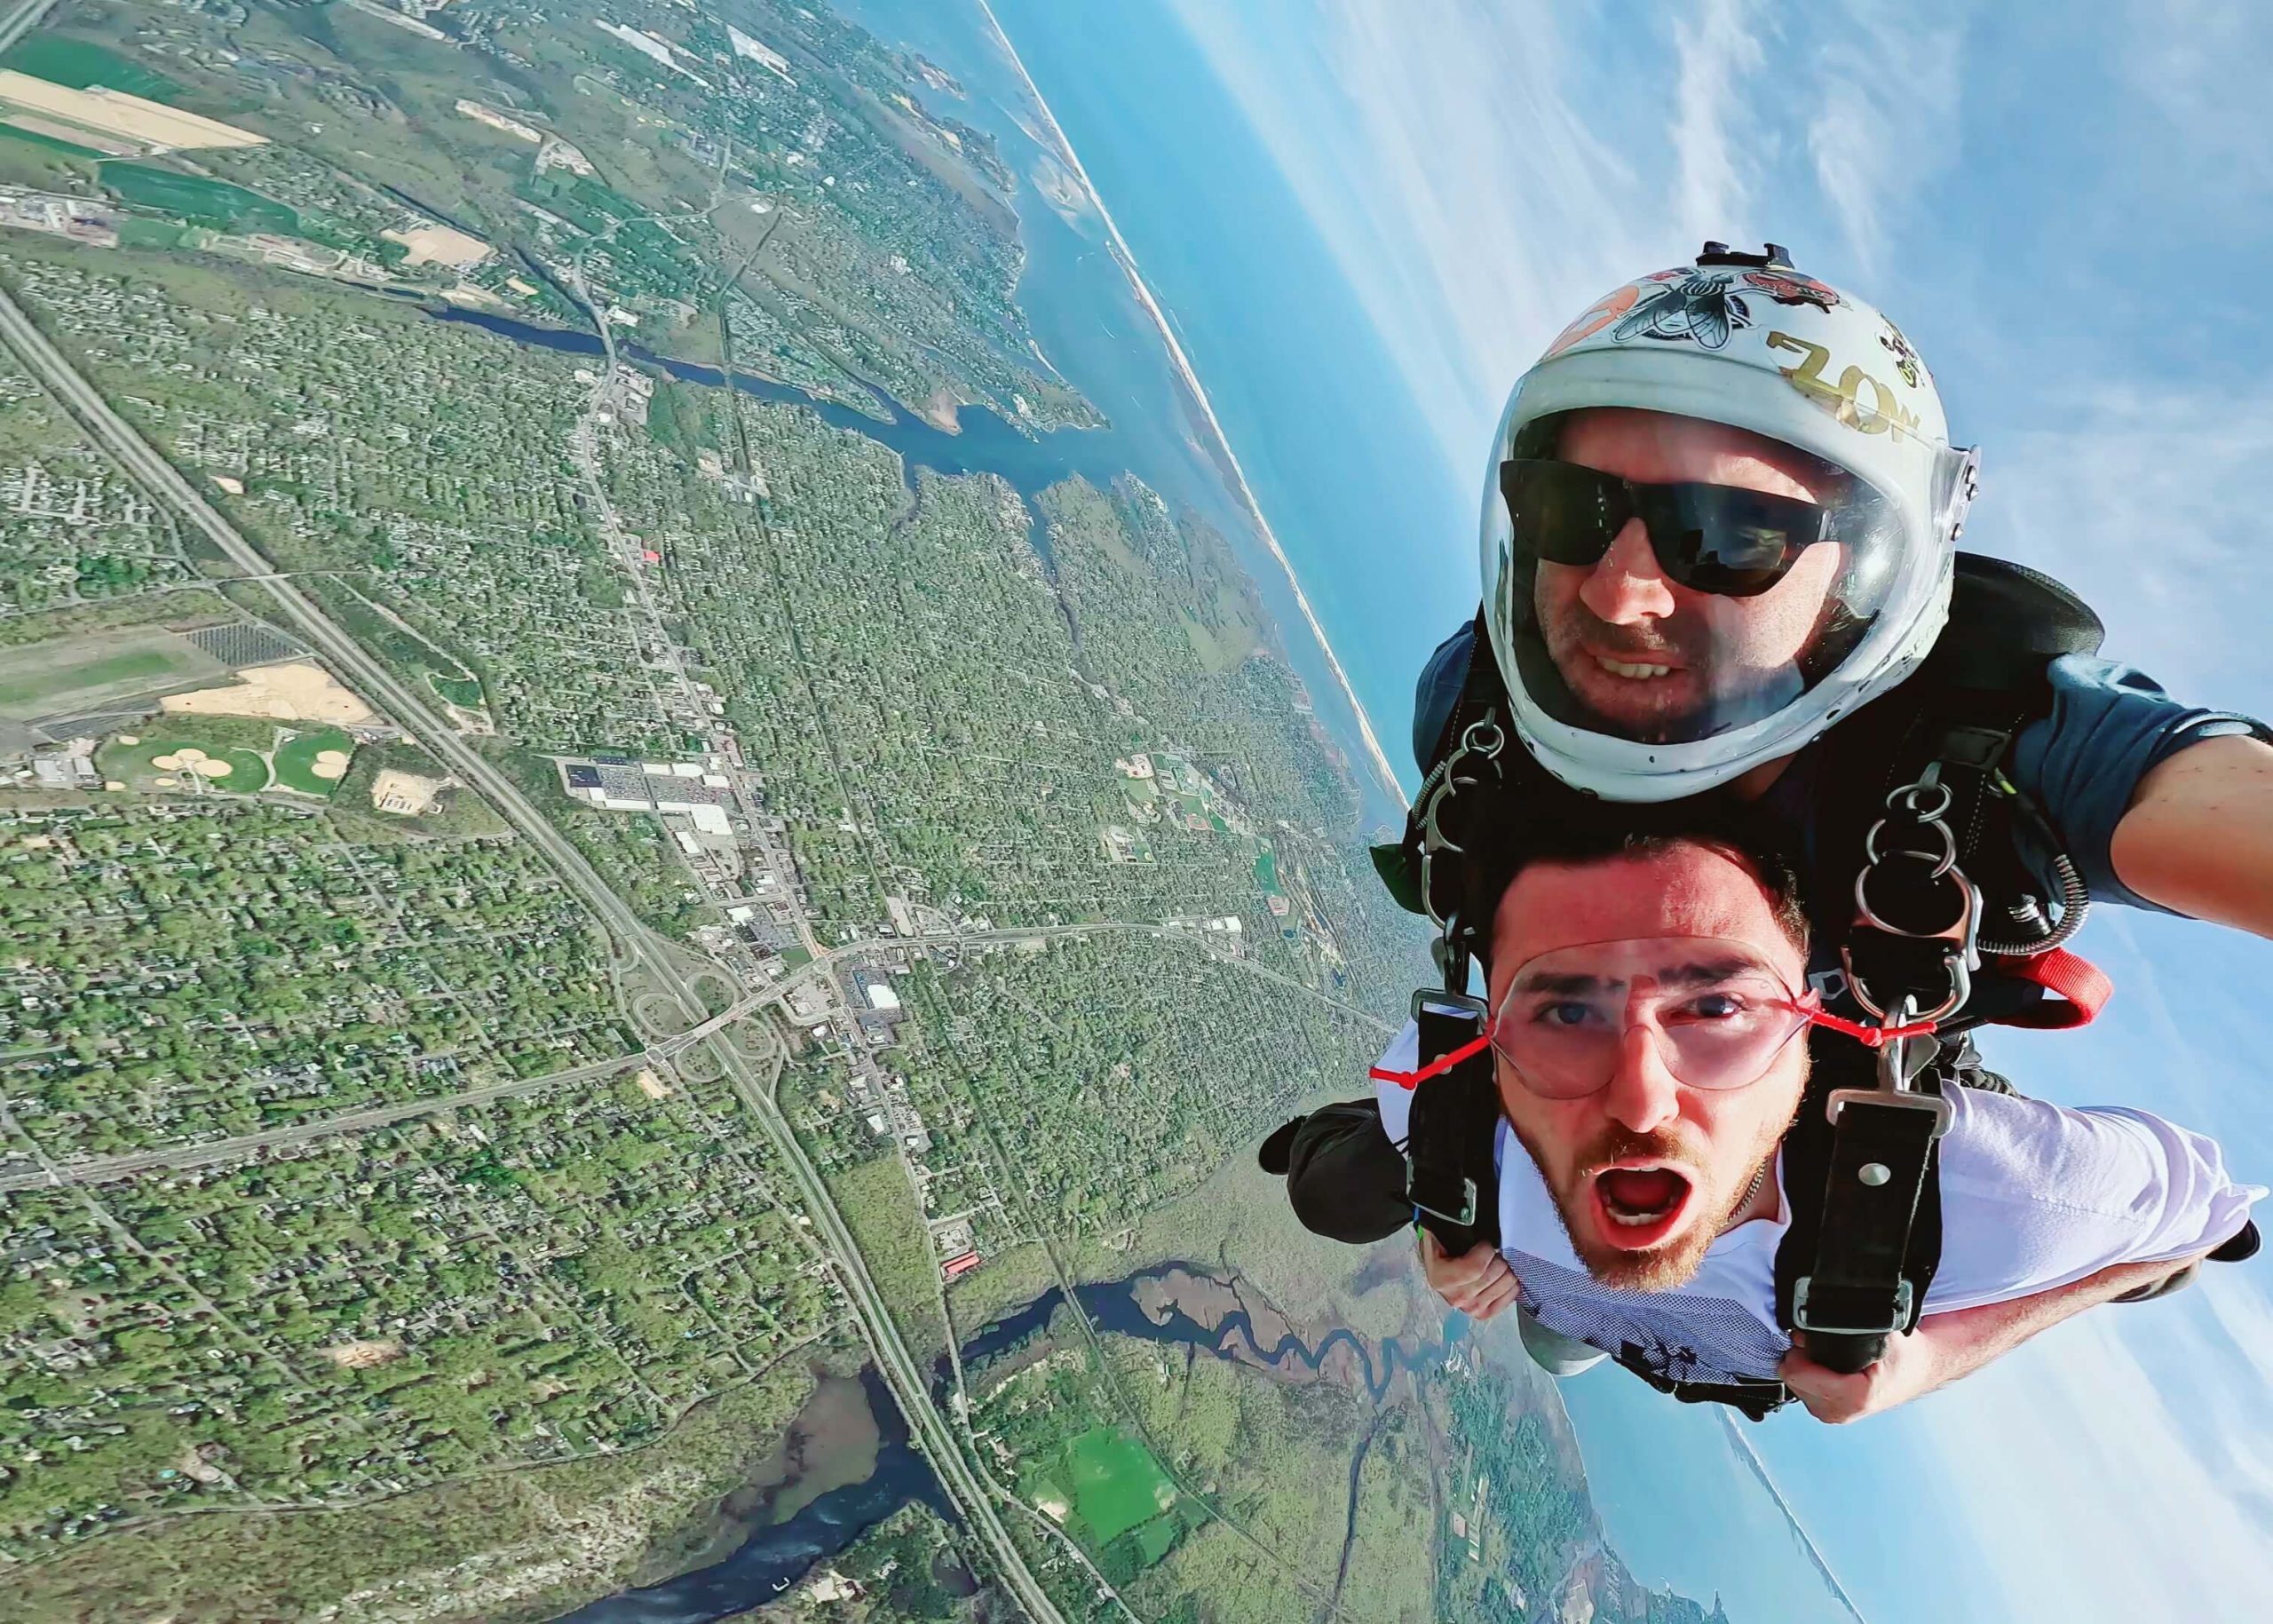 Skydiving over New York